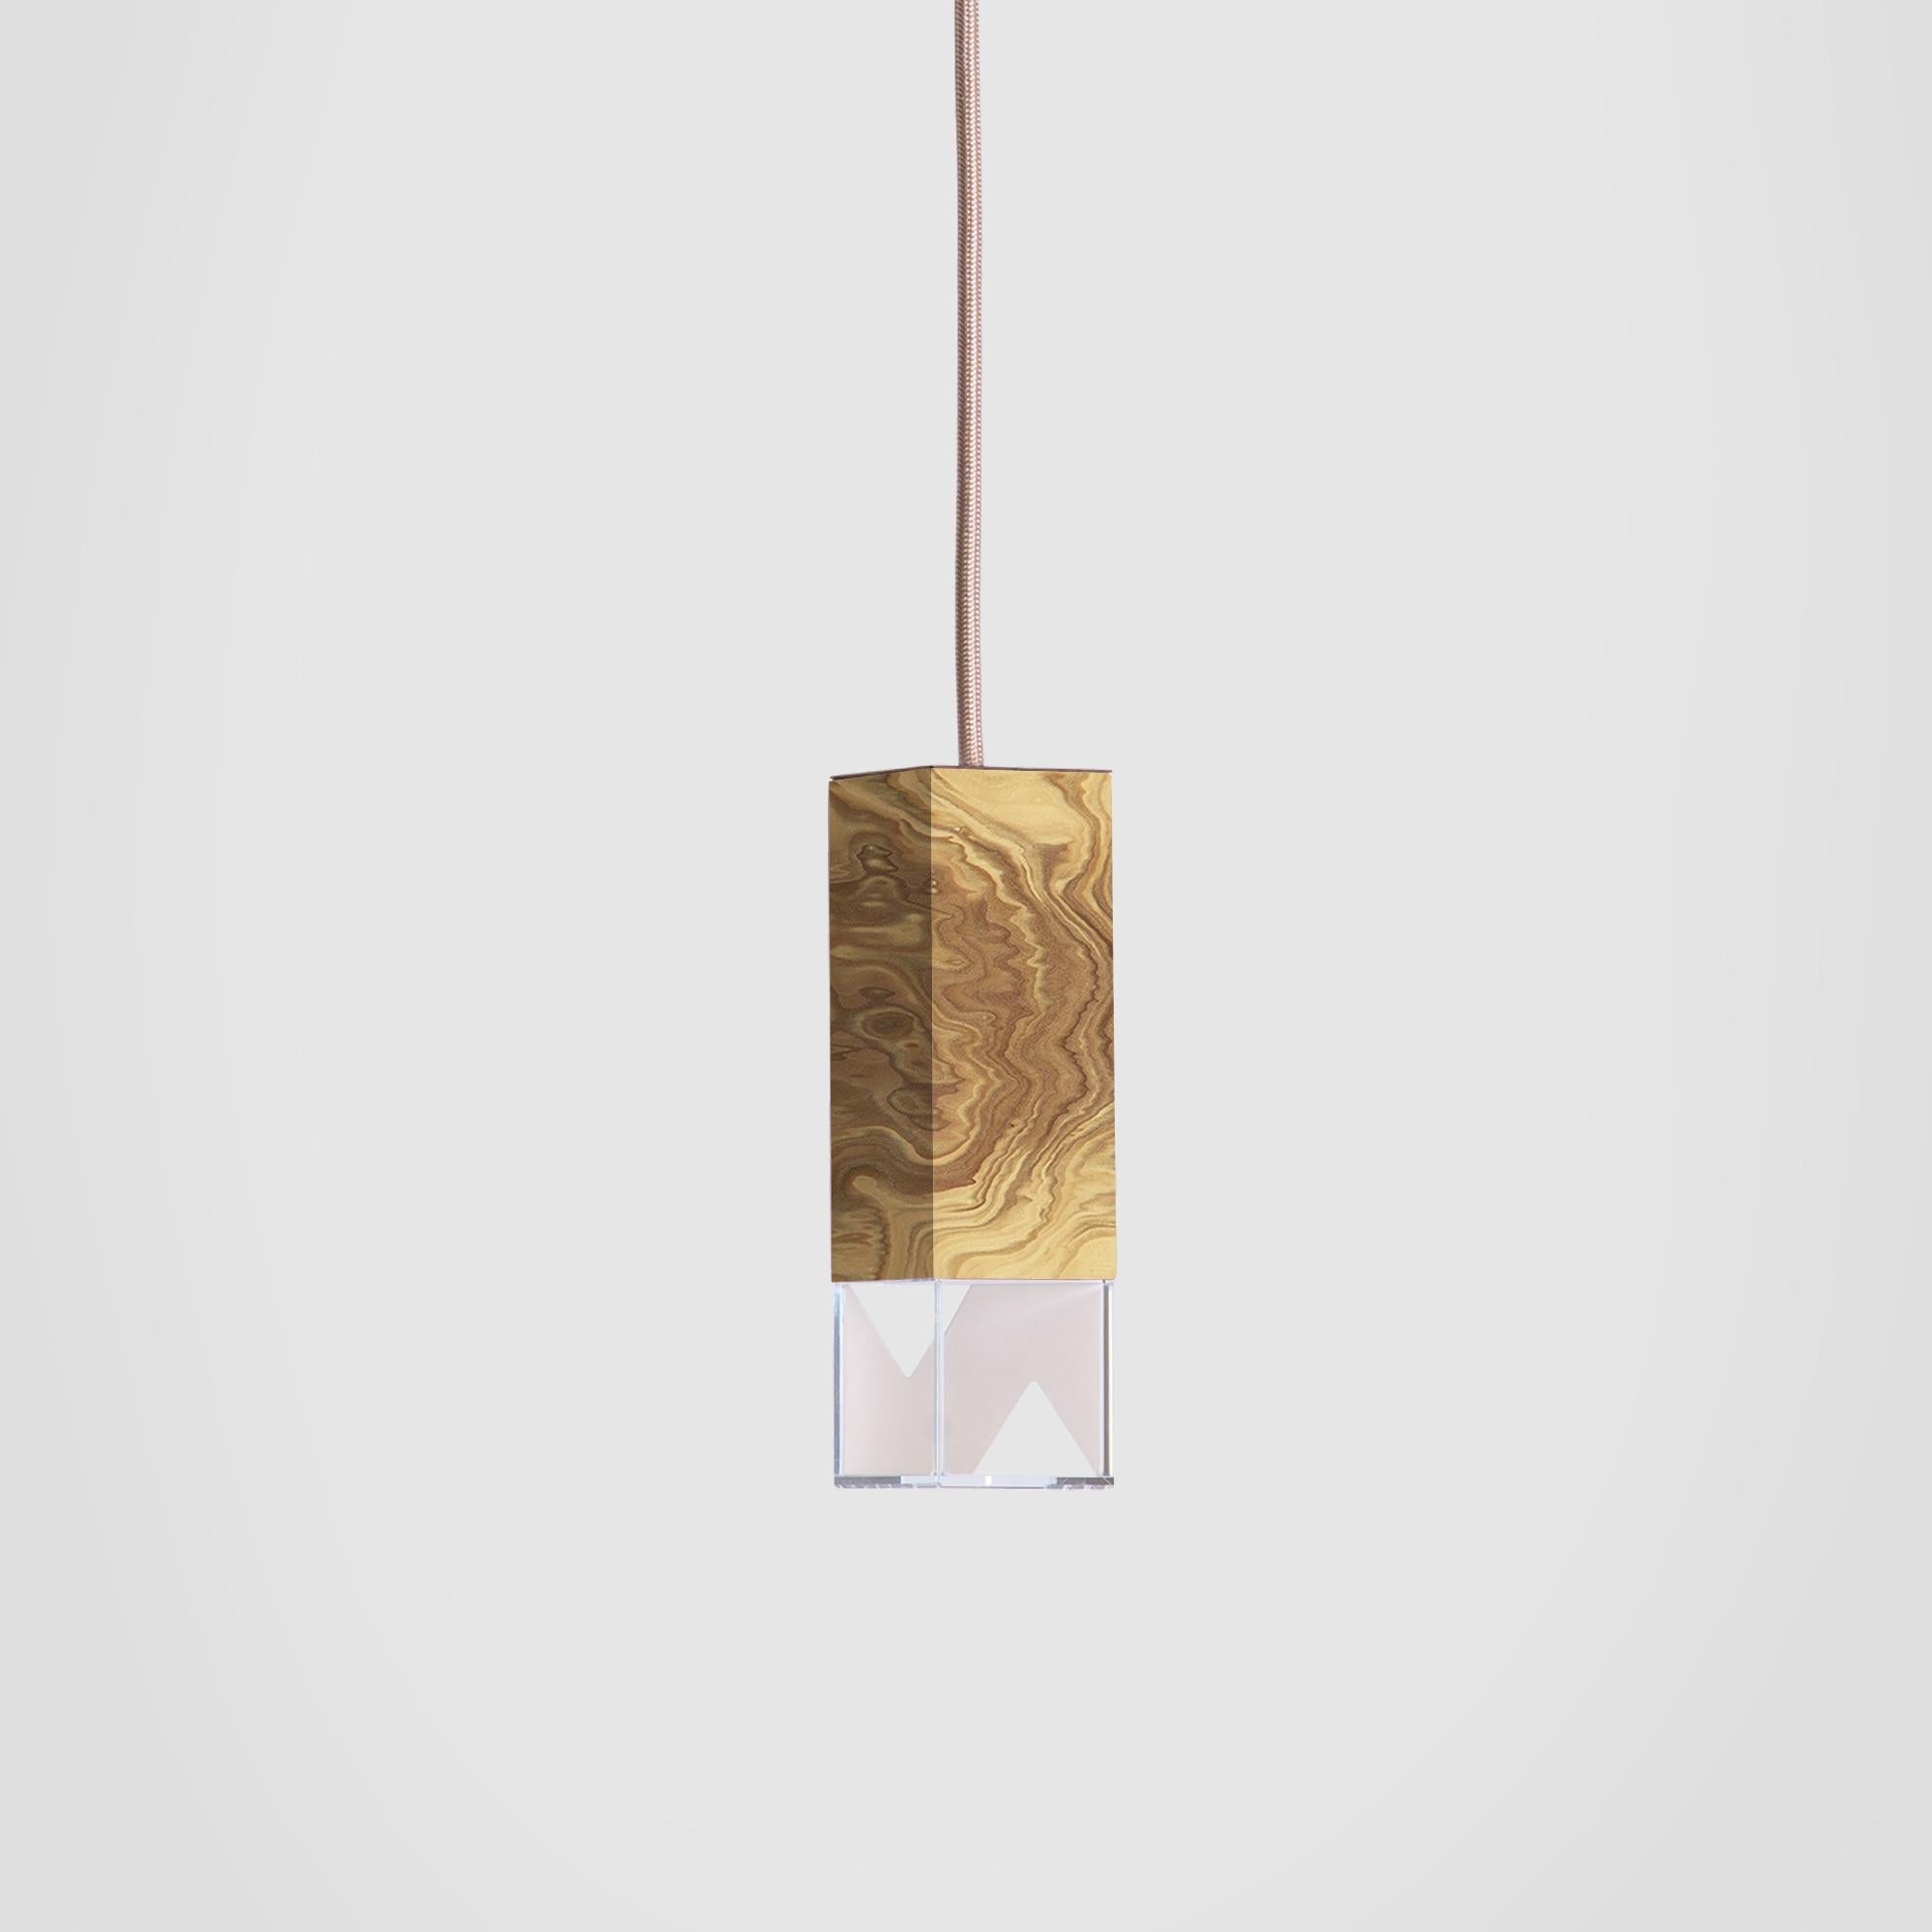 About
Suspended Minimal Modern Olive Wood Light by Formaminima

Lamp/One Wood 01 Revamp Edition
Design by Formaminima
Single Pendant
Materials:
Body lamp handcrafted in Olive briarwood / crystal glass diffuser hosting Limoges biscuit-finish